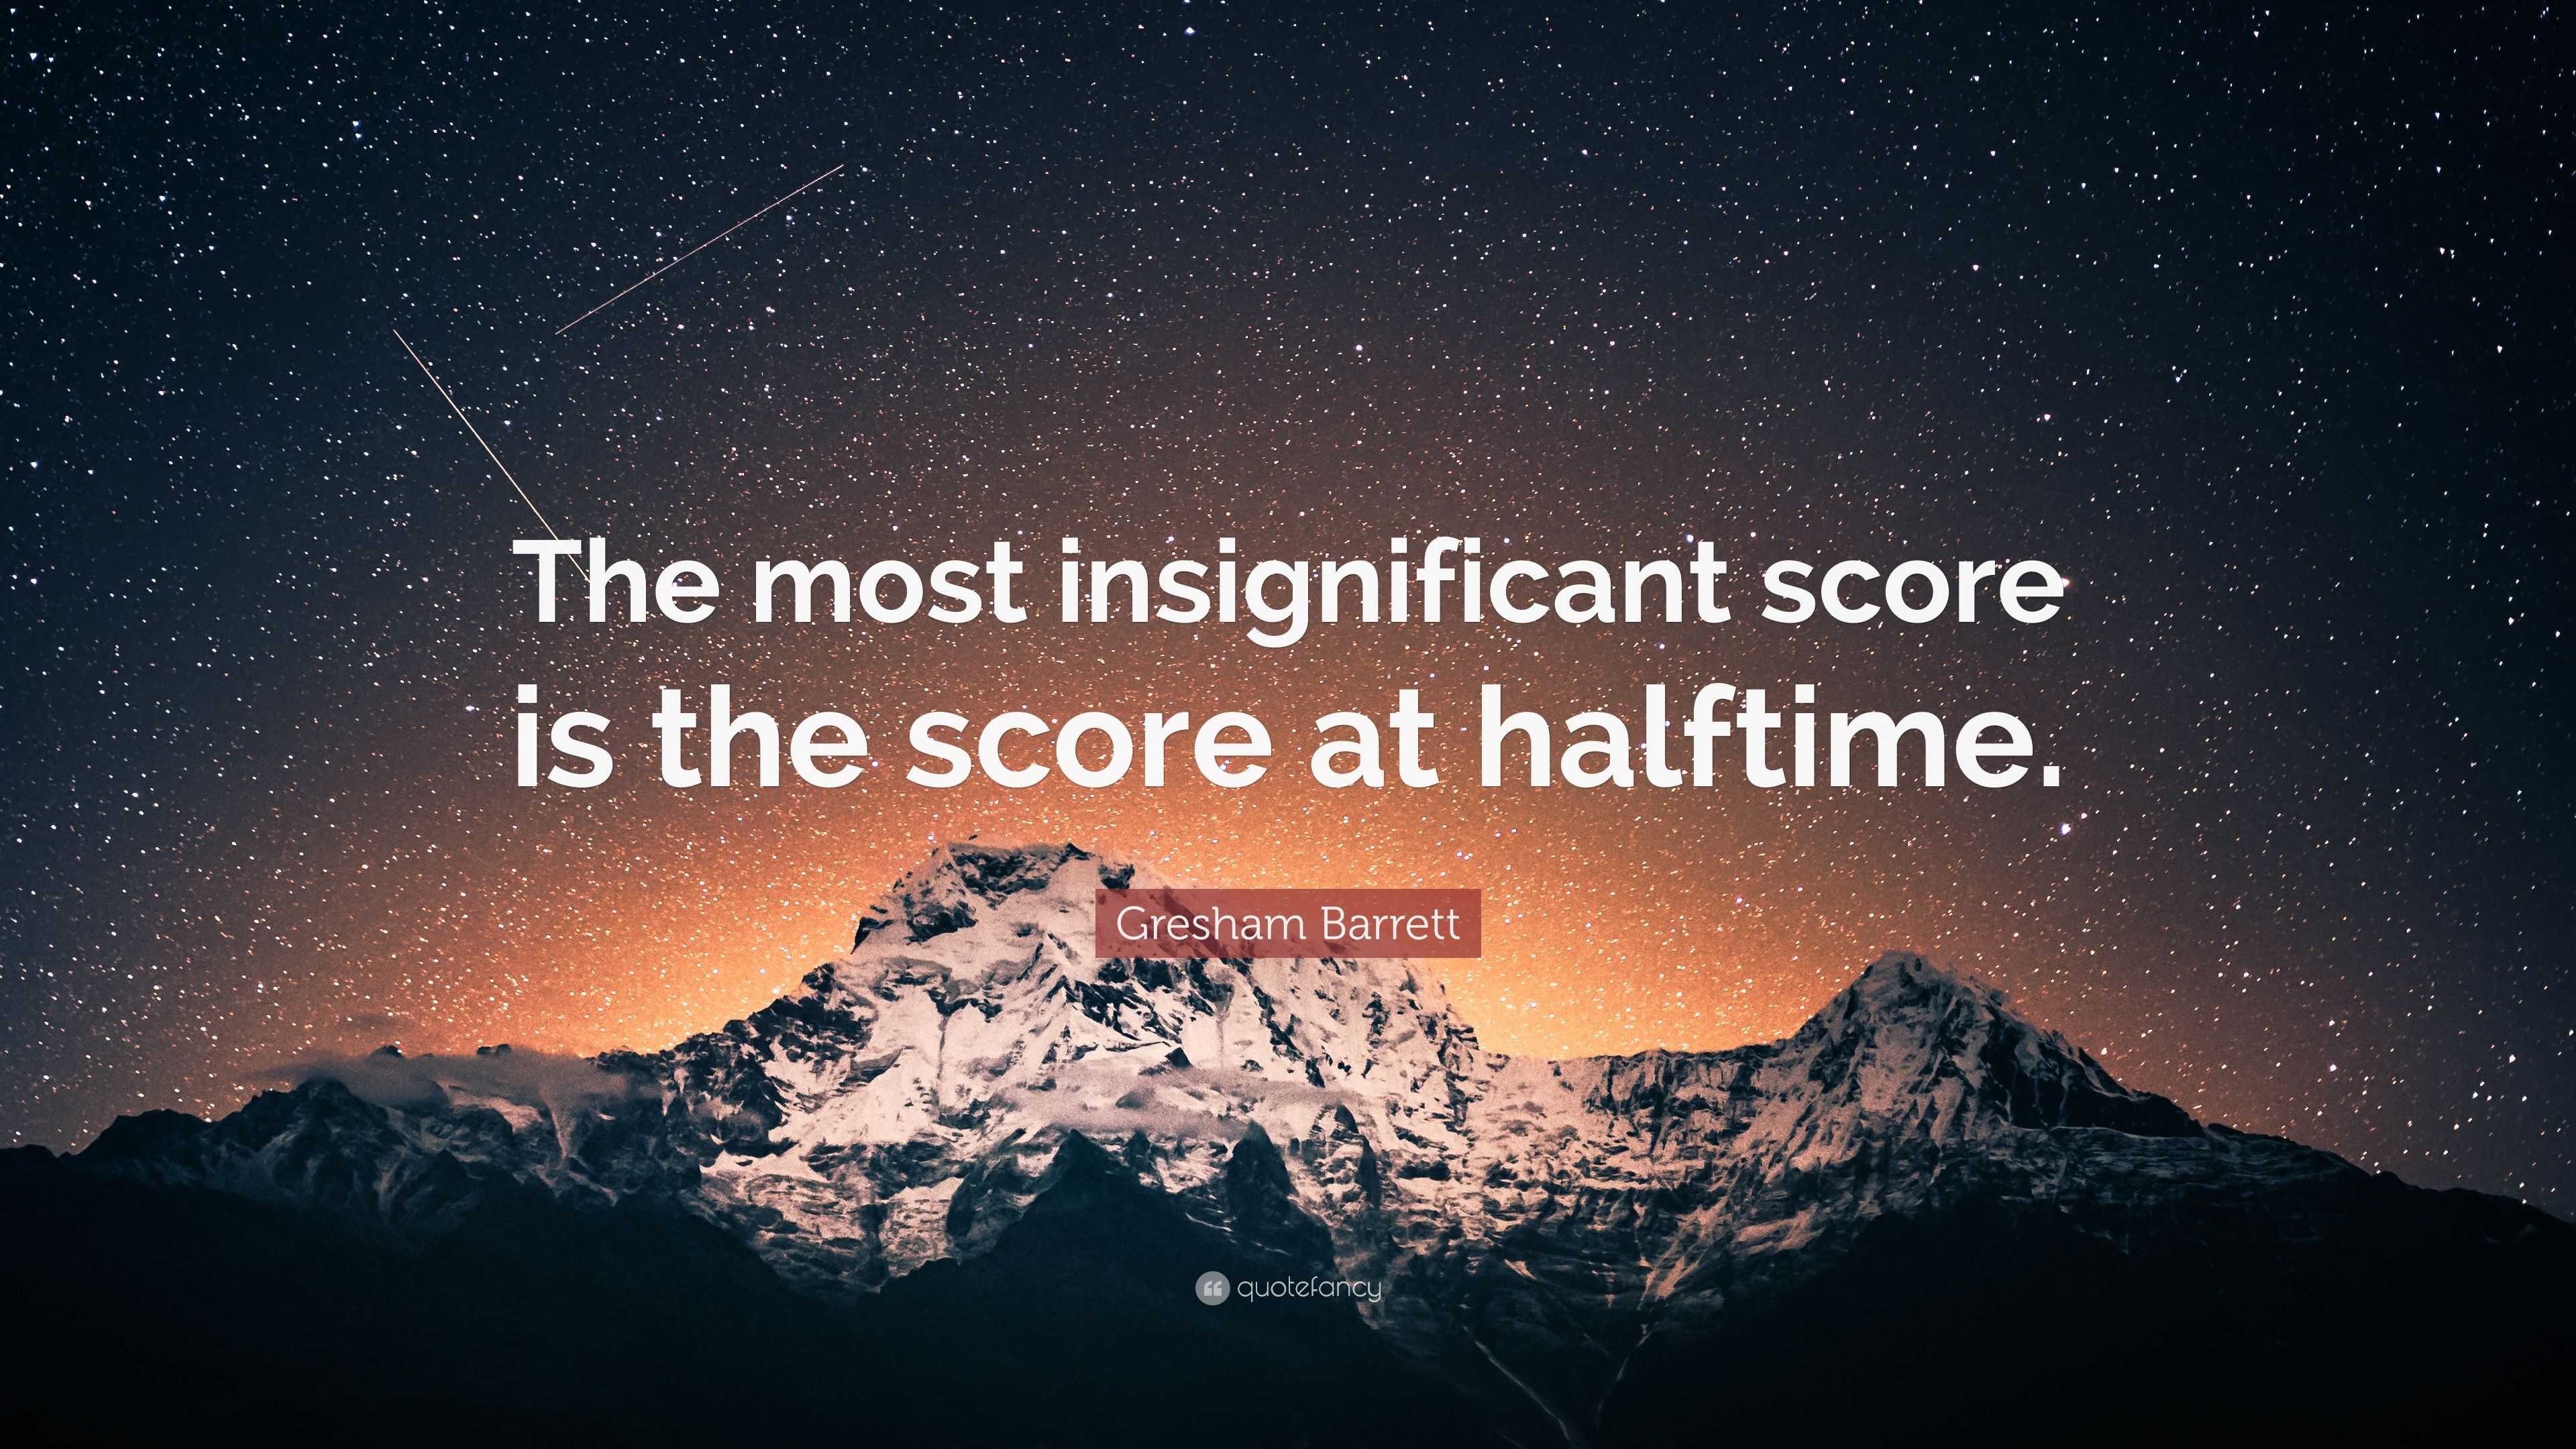 Gresham Barrett Quote The Most Insignificant Score Is The Score At Halftime